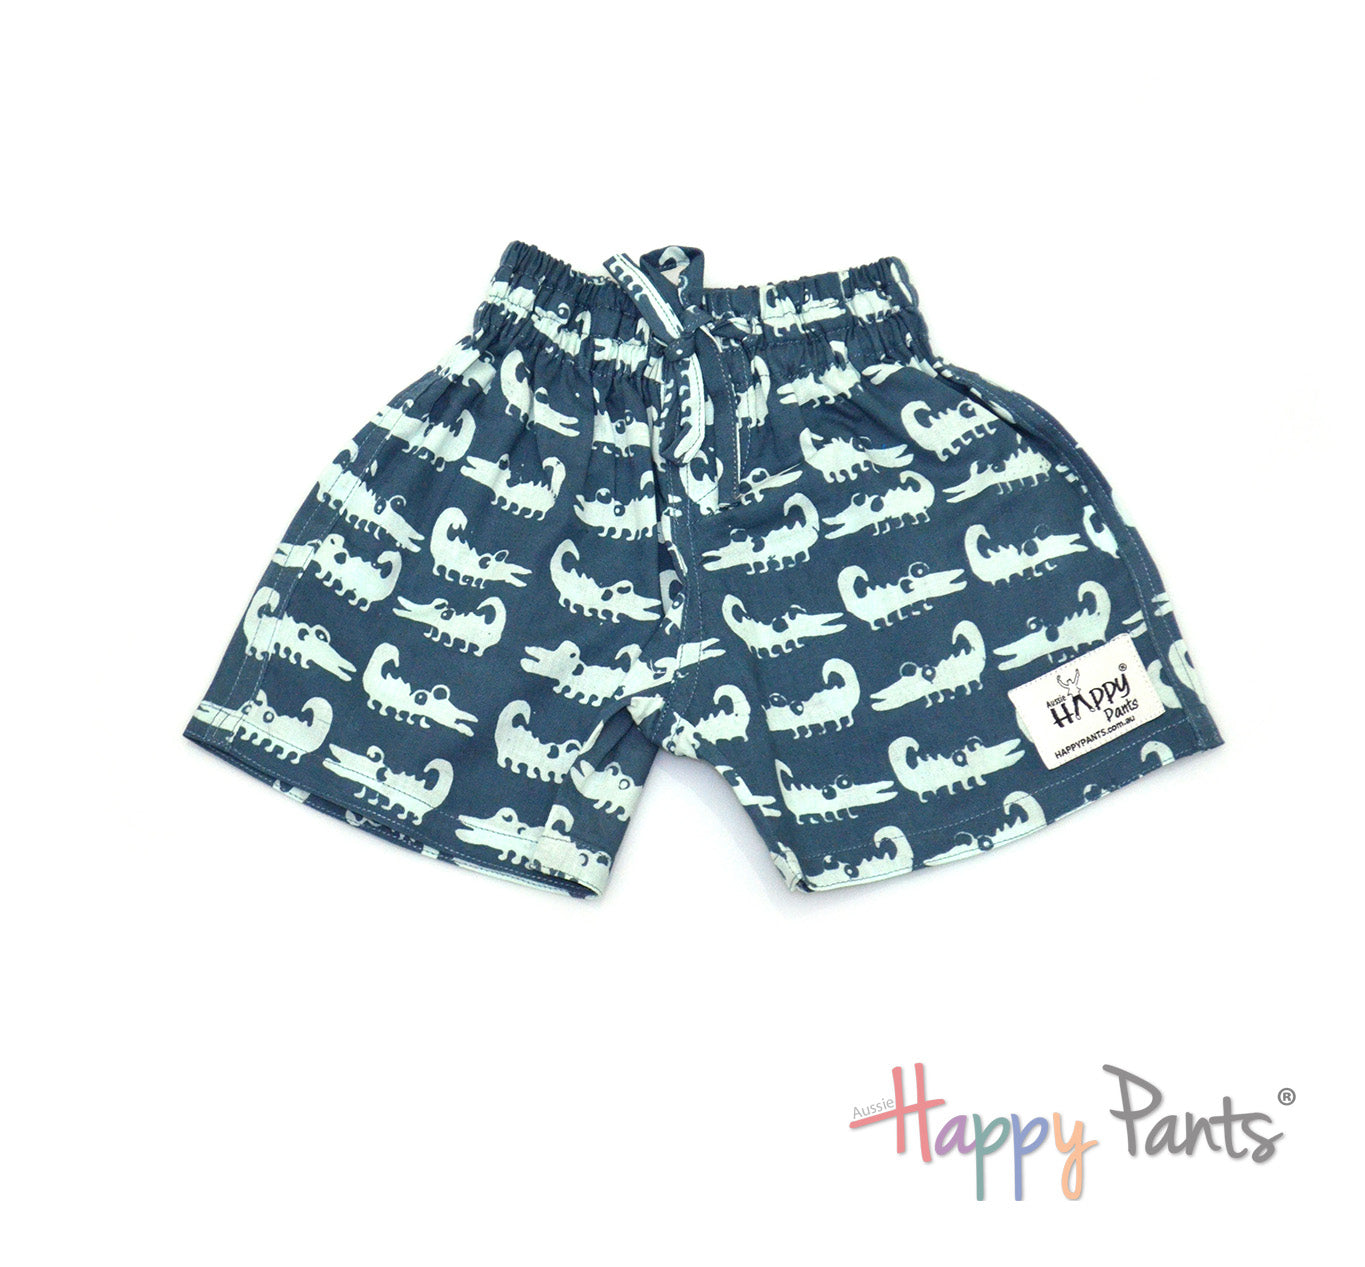 Curious Croc Blue Shorts for Girls